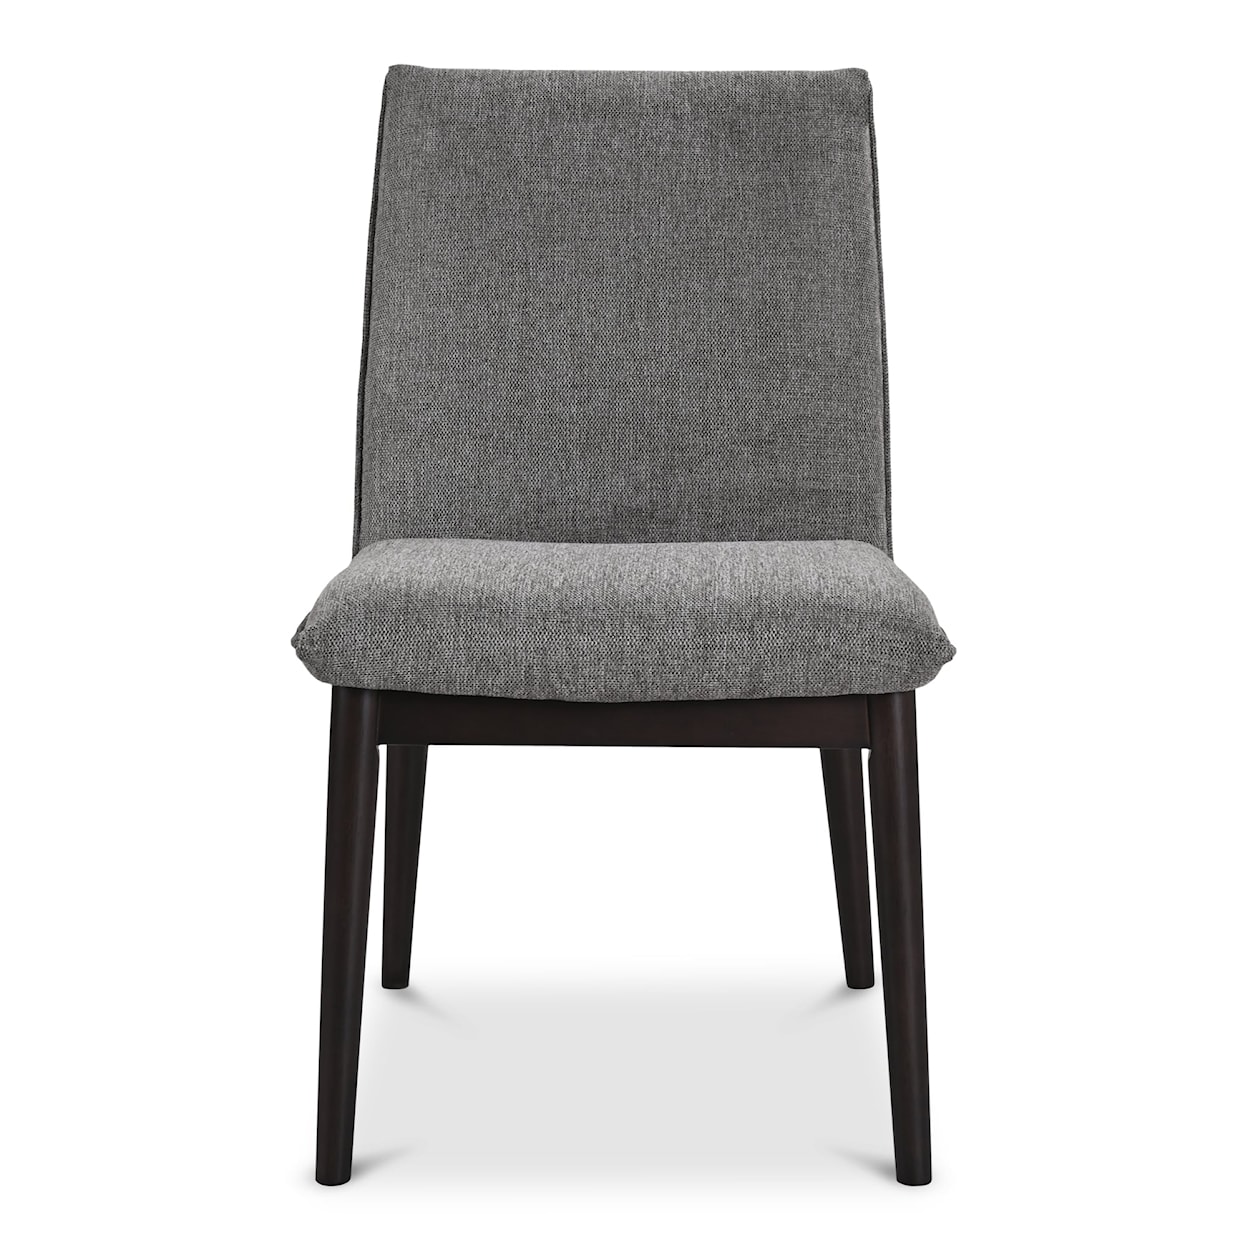 Moe's Home Collection Charlie Dining Chair